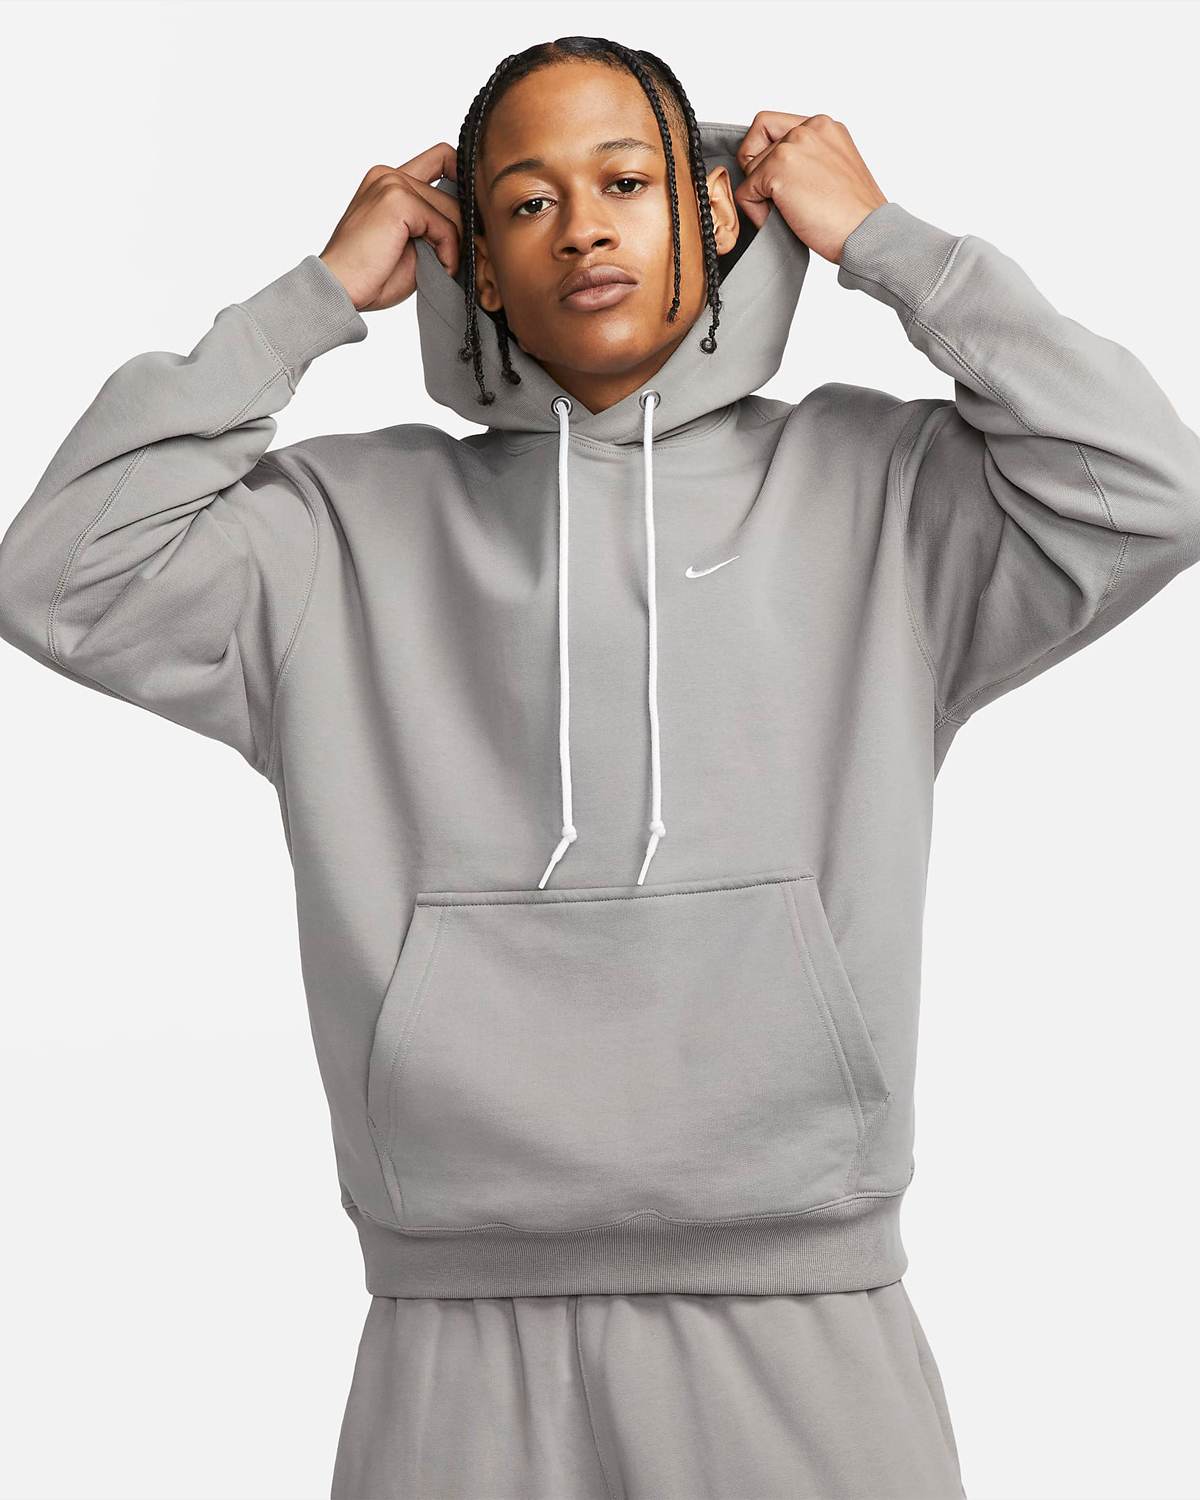 Nike Air Max Plus Flat Pewter Hoodie Shorts Outfit Match